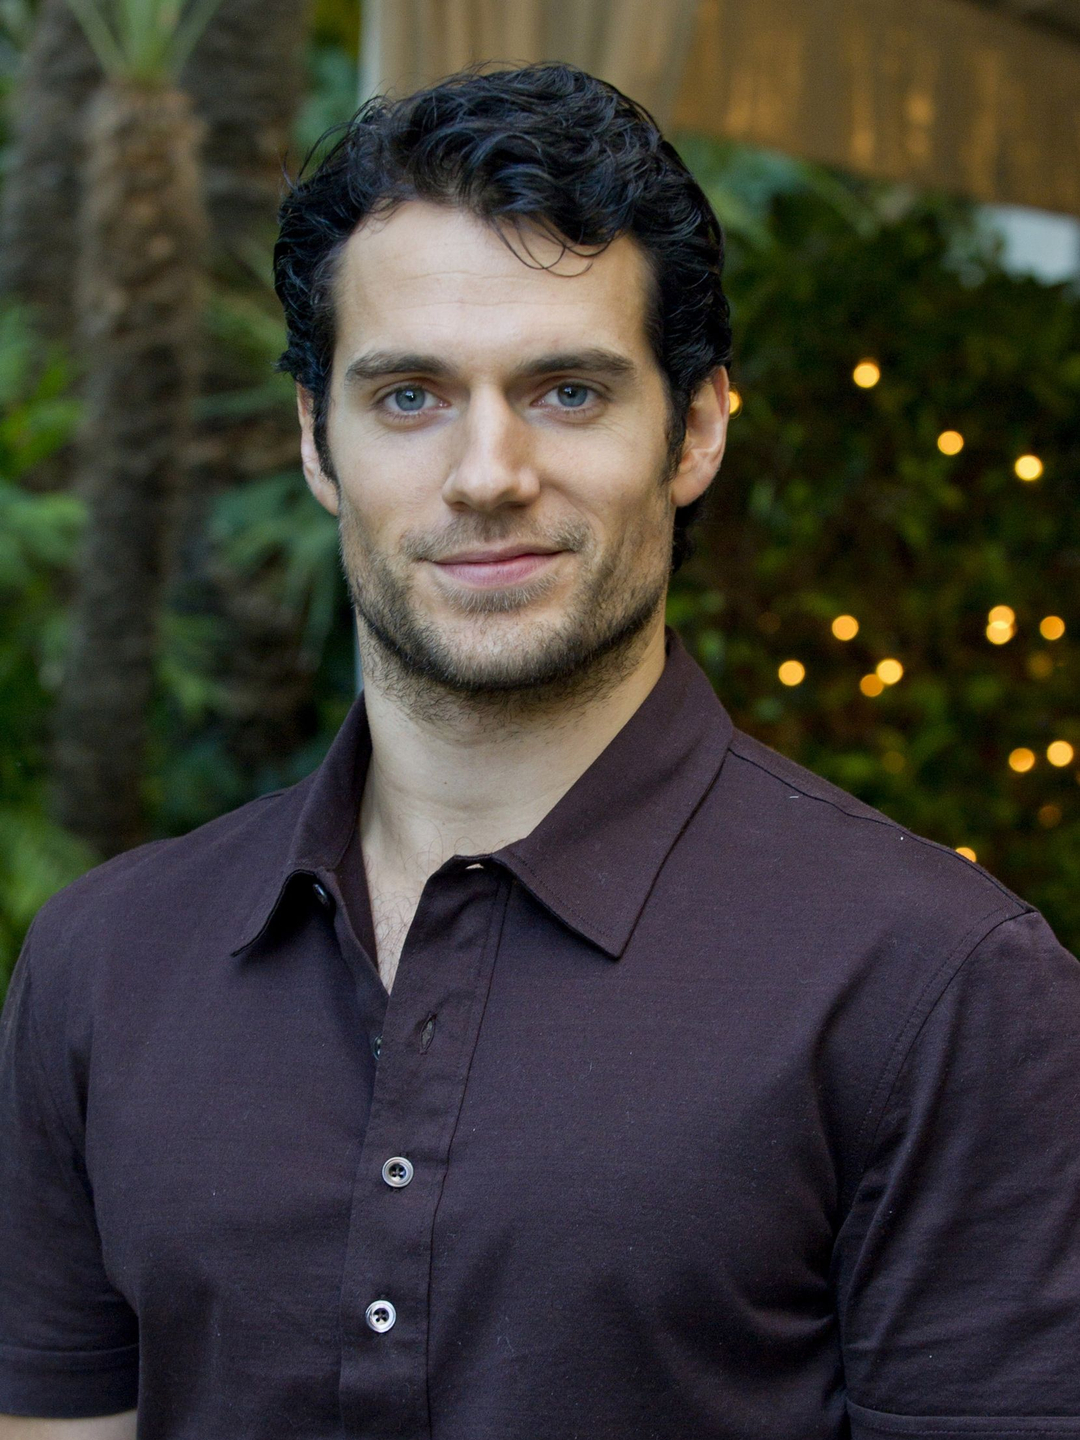 Henry Cavill personal traits